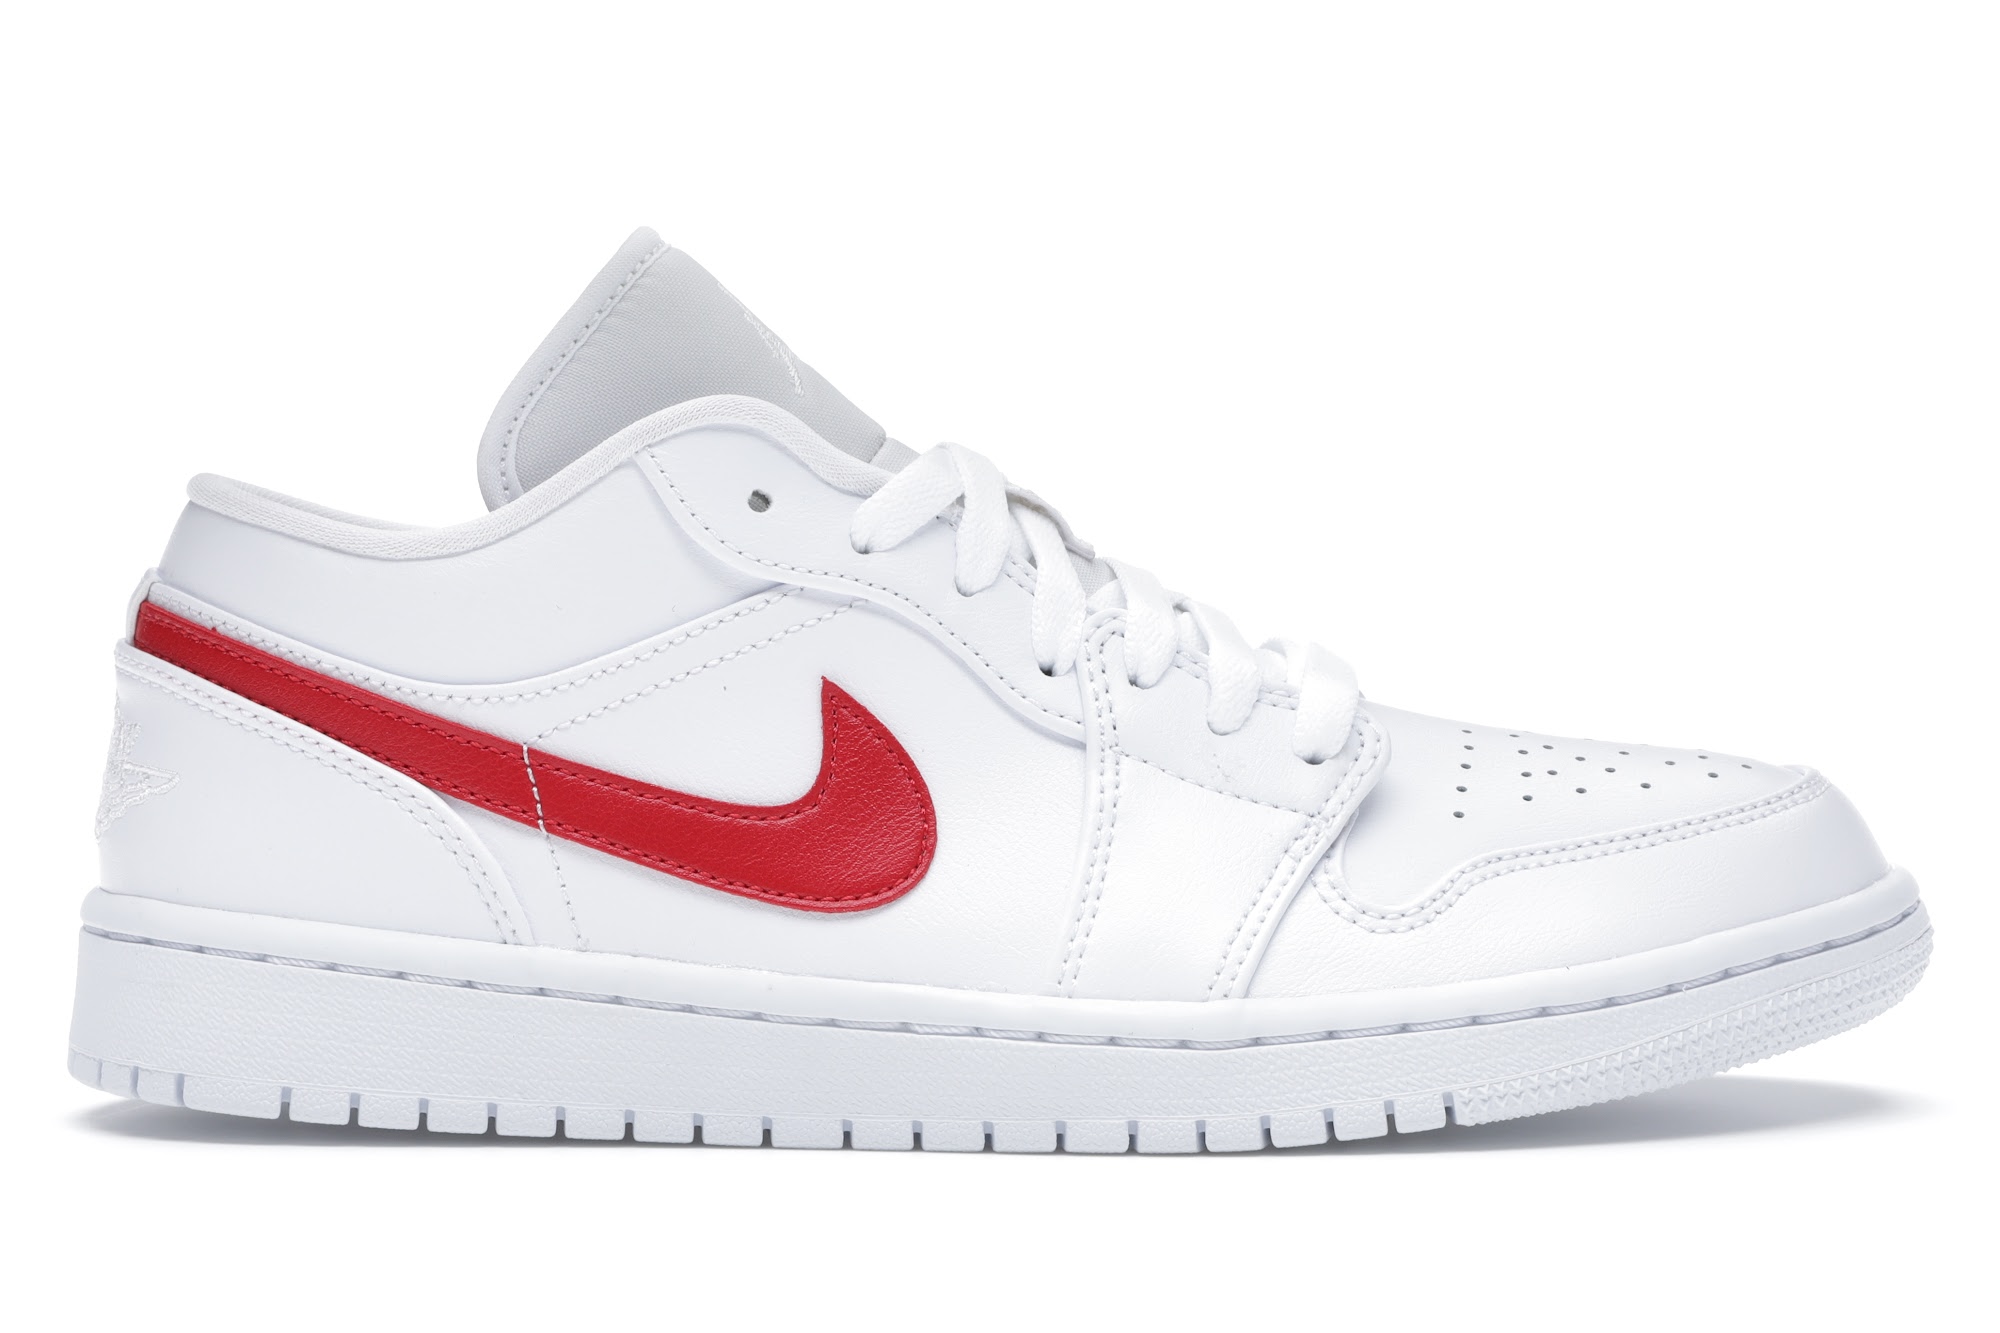 red and white jordan 1 low